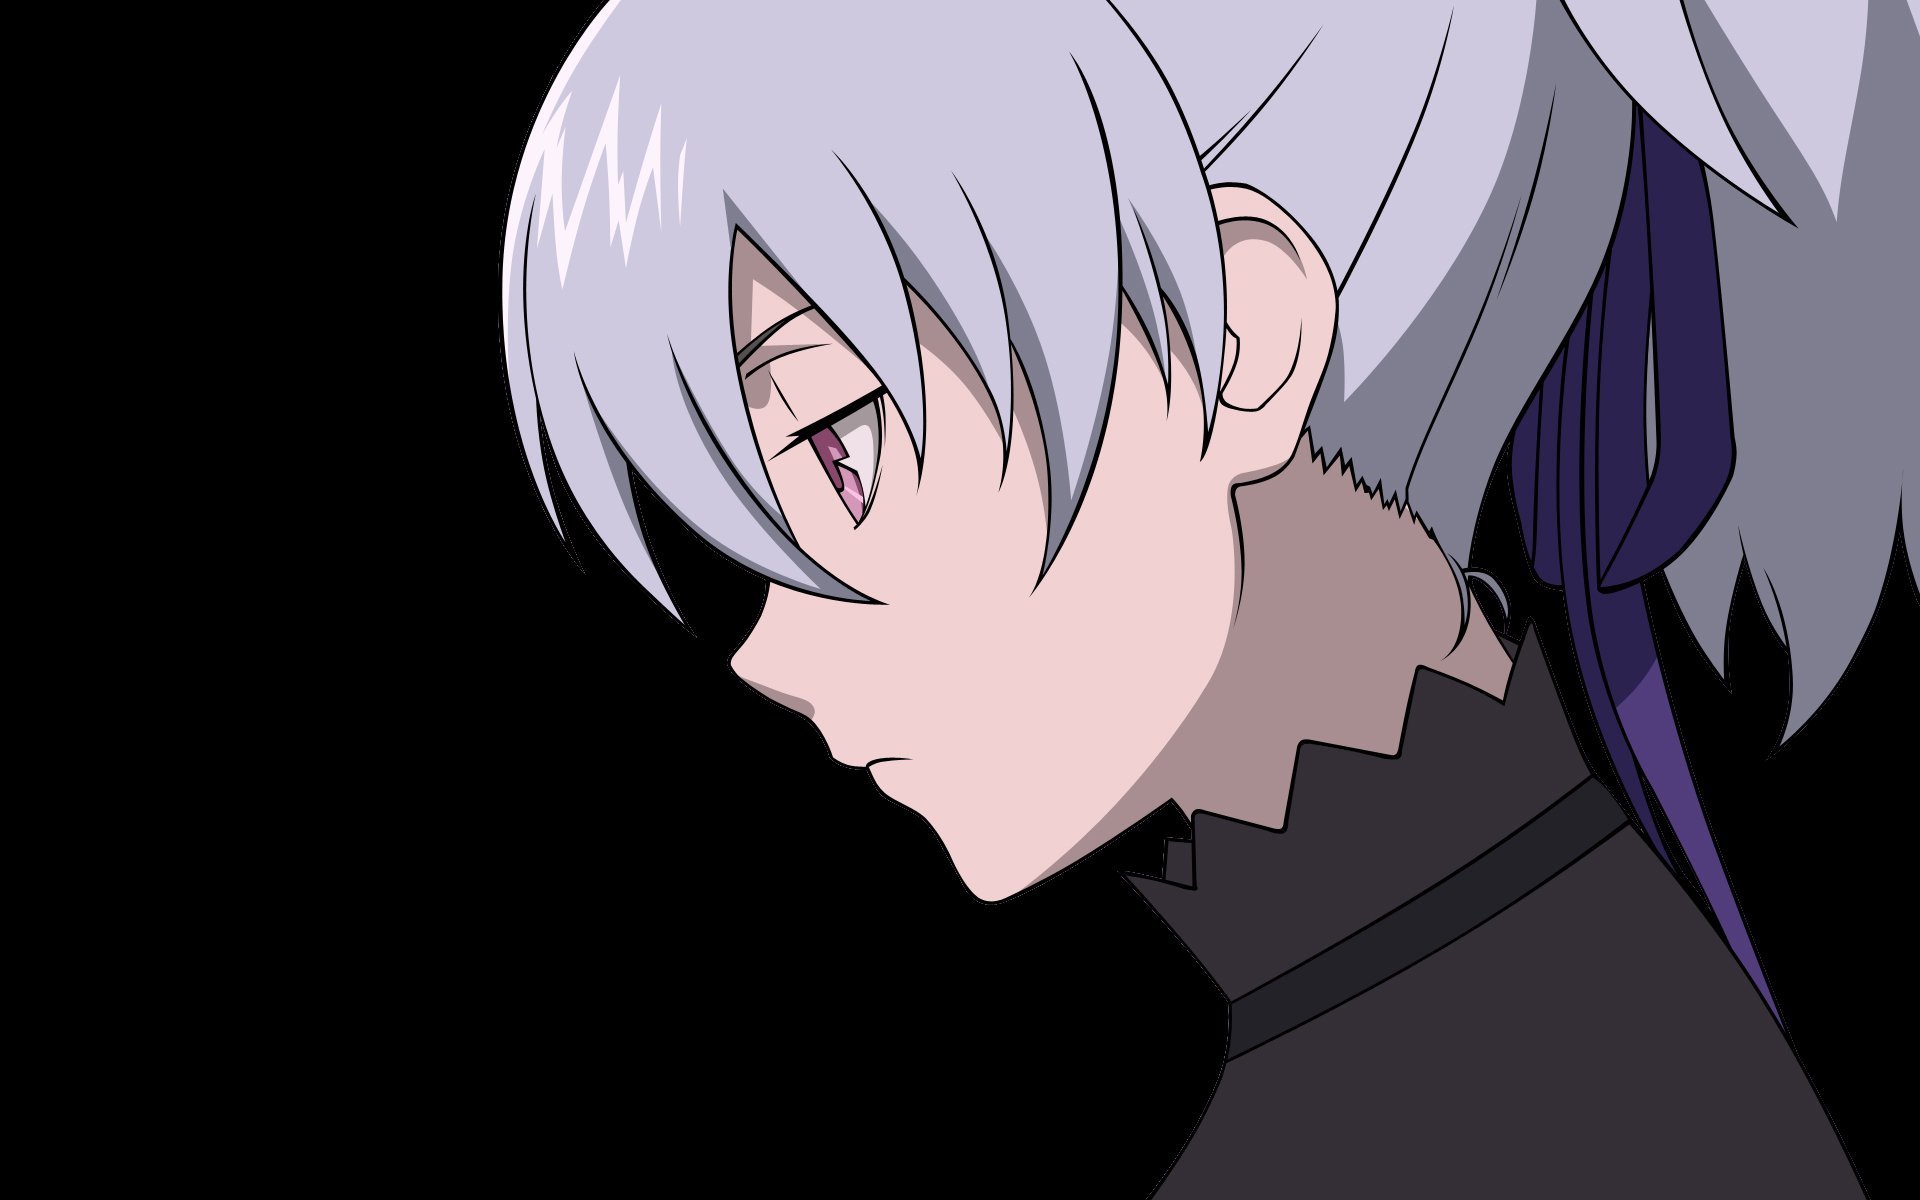 Yin from Darker Than Black, an anime character with dark and mysterious features.